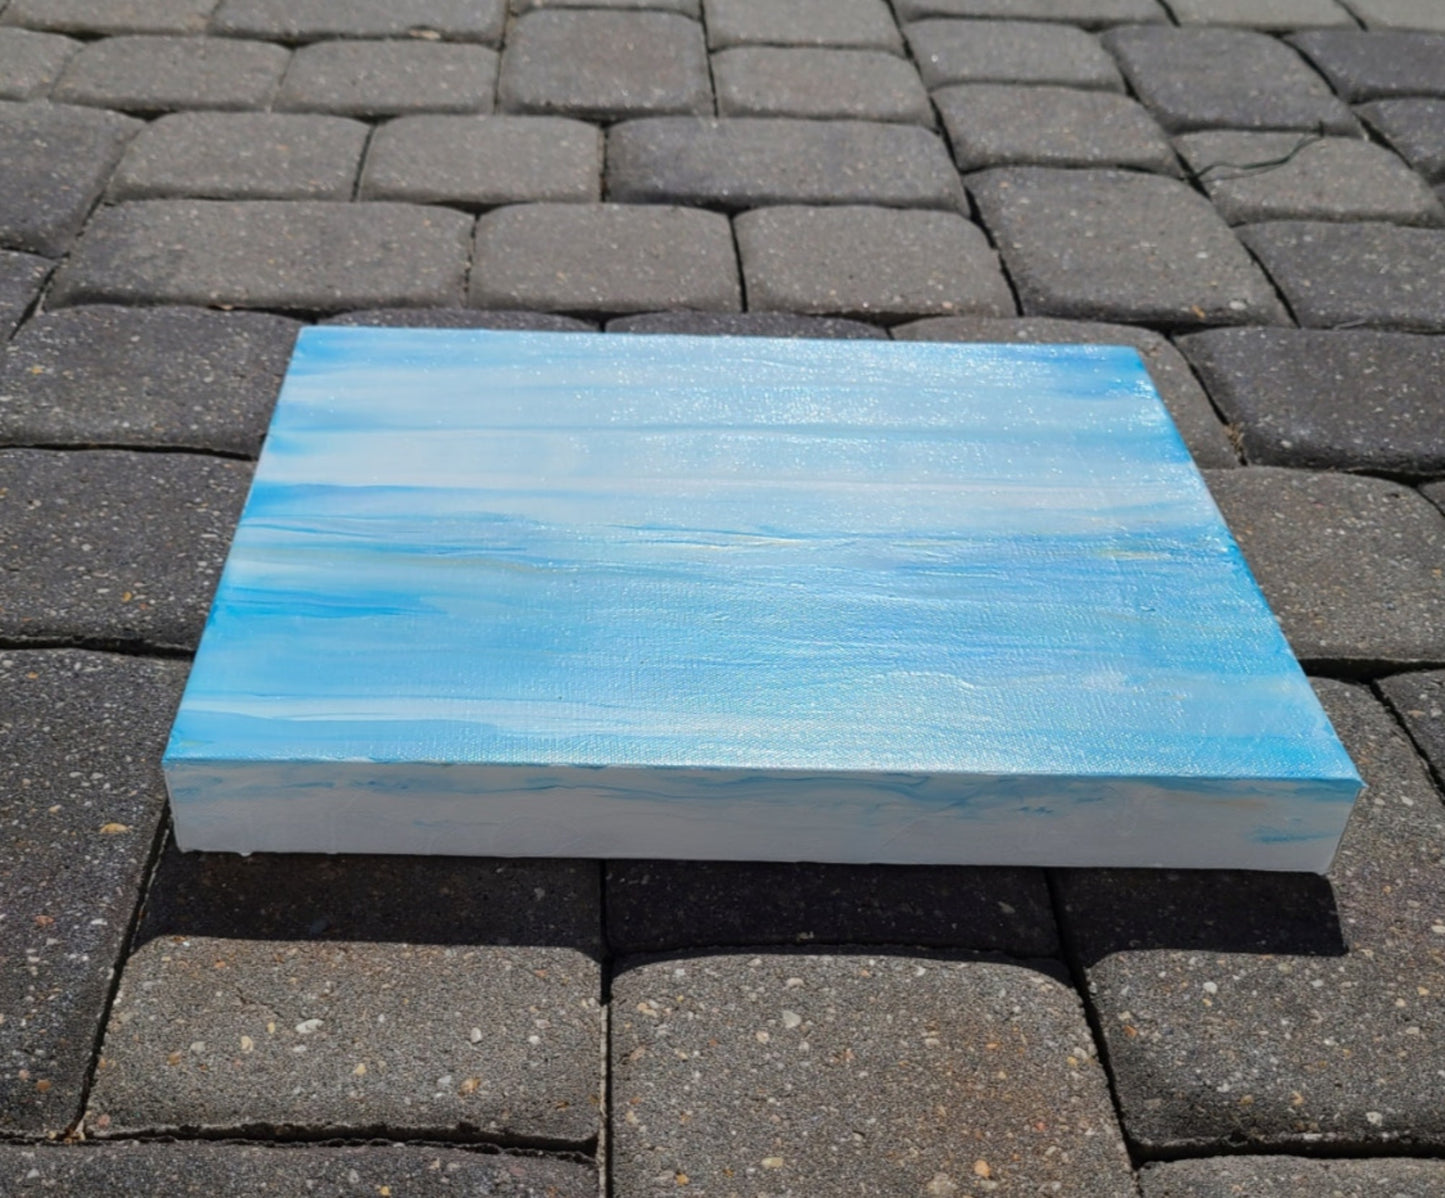 Tranquility, Calm Seas and Blue Skies, 14 x 11 Canvas Acrylic Painting